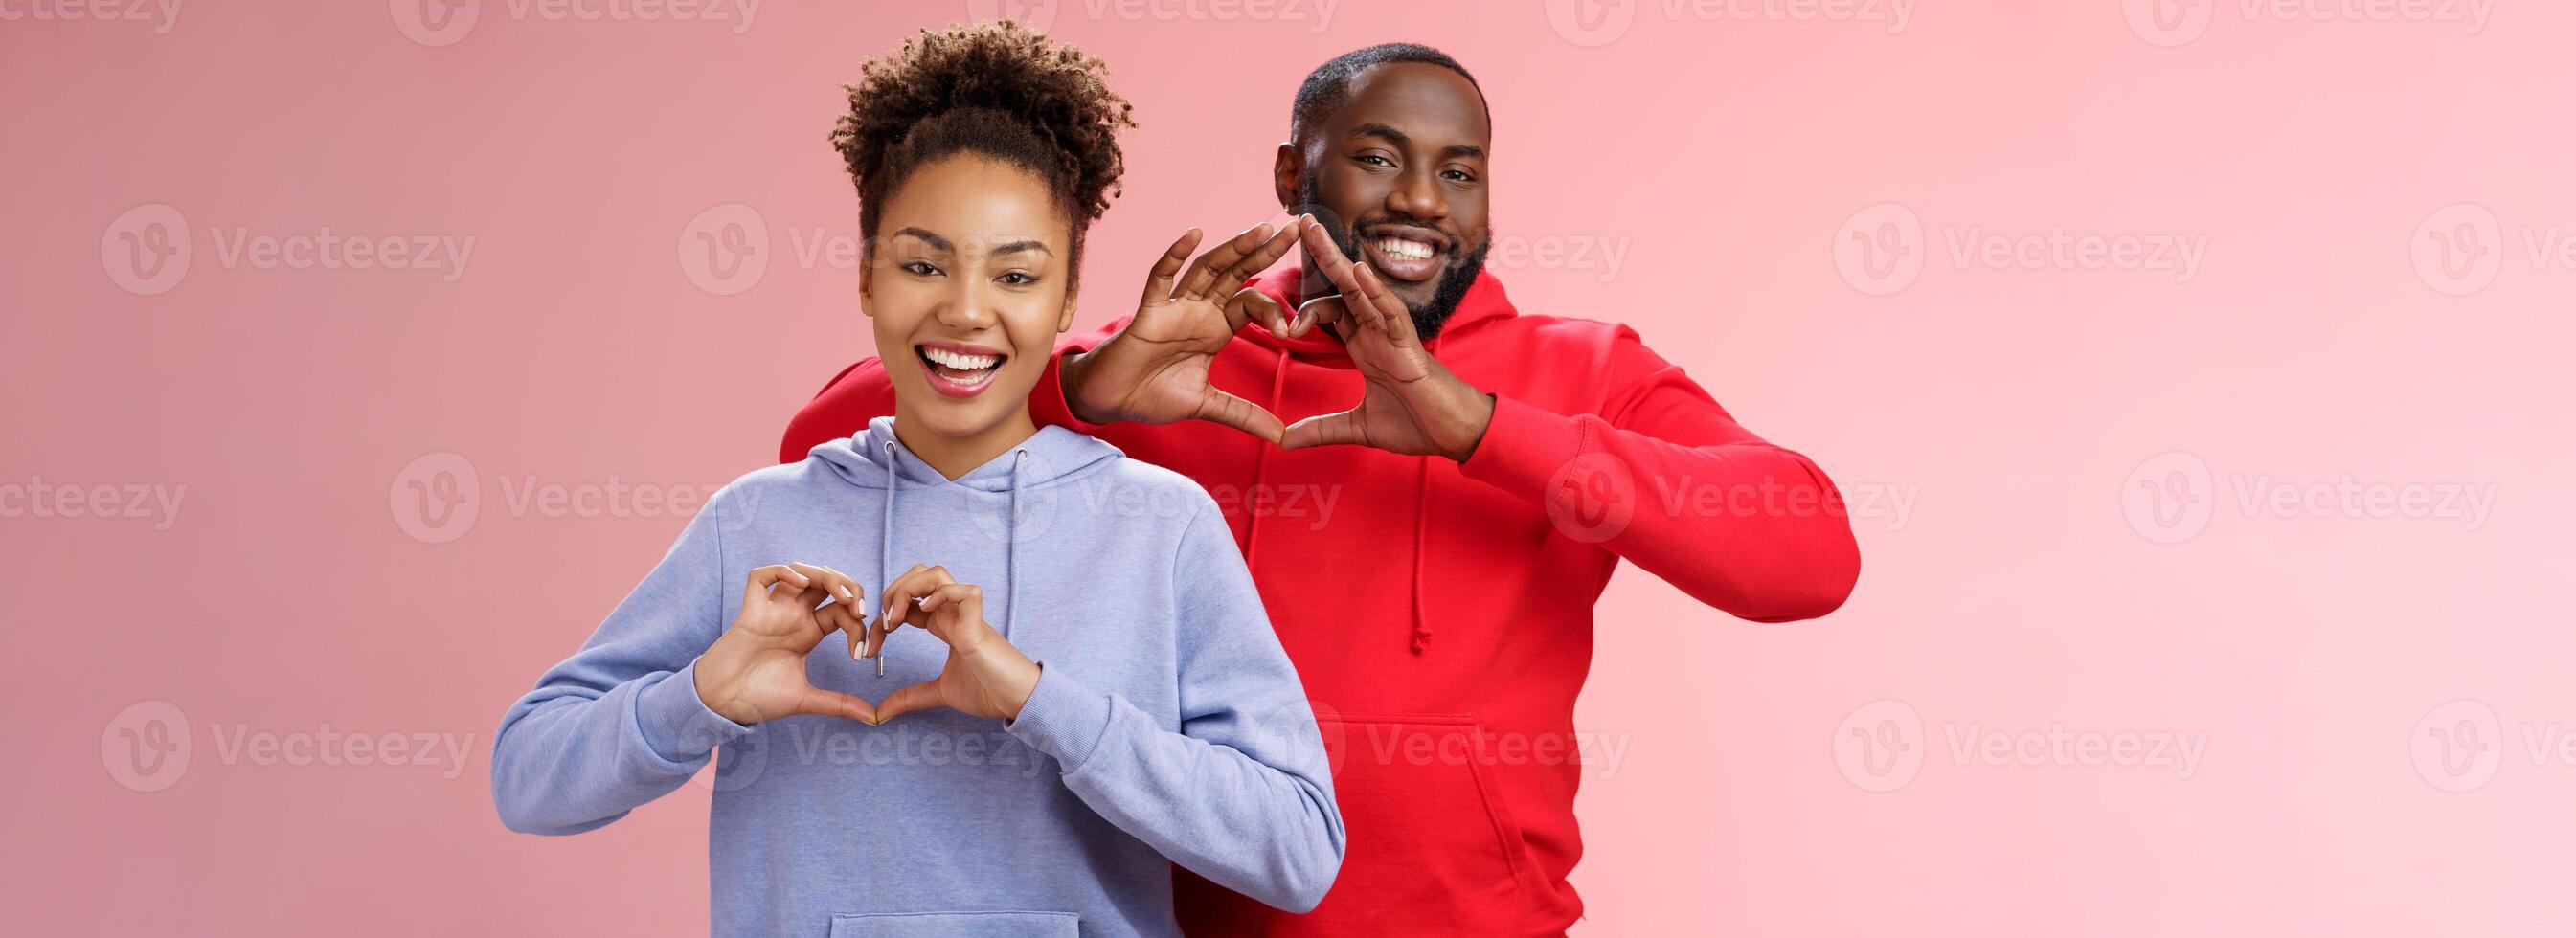 Charming joyful caring young african american family man woman siblings smiling broadly show heart gestures grinning express love empathy positivity, two loyal friends cherish friendship photo